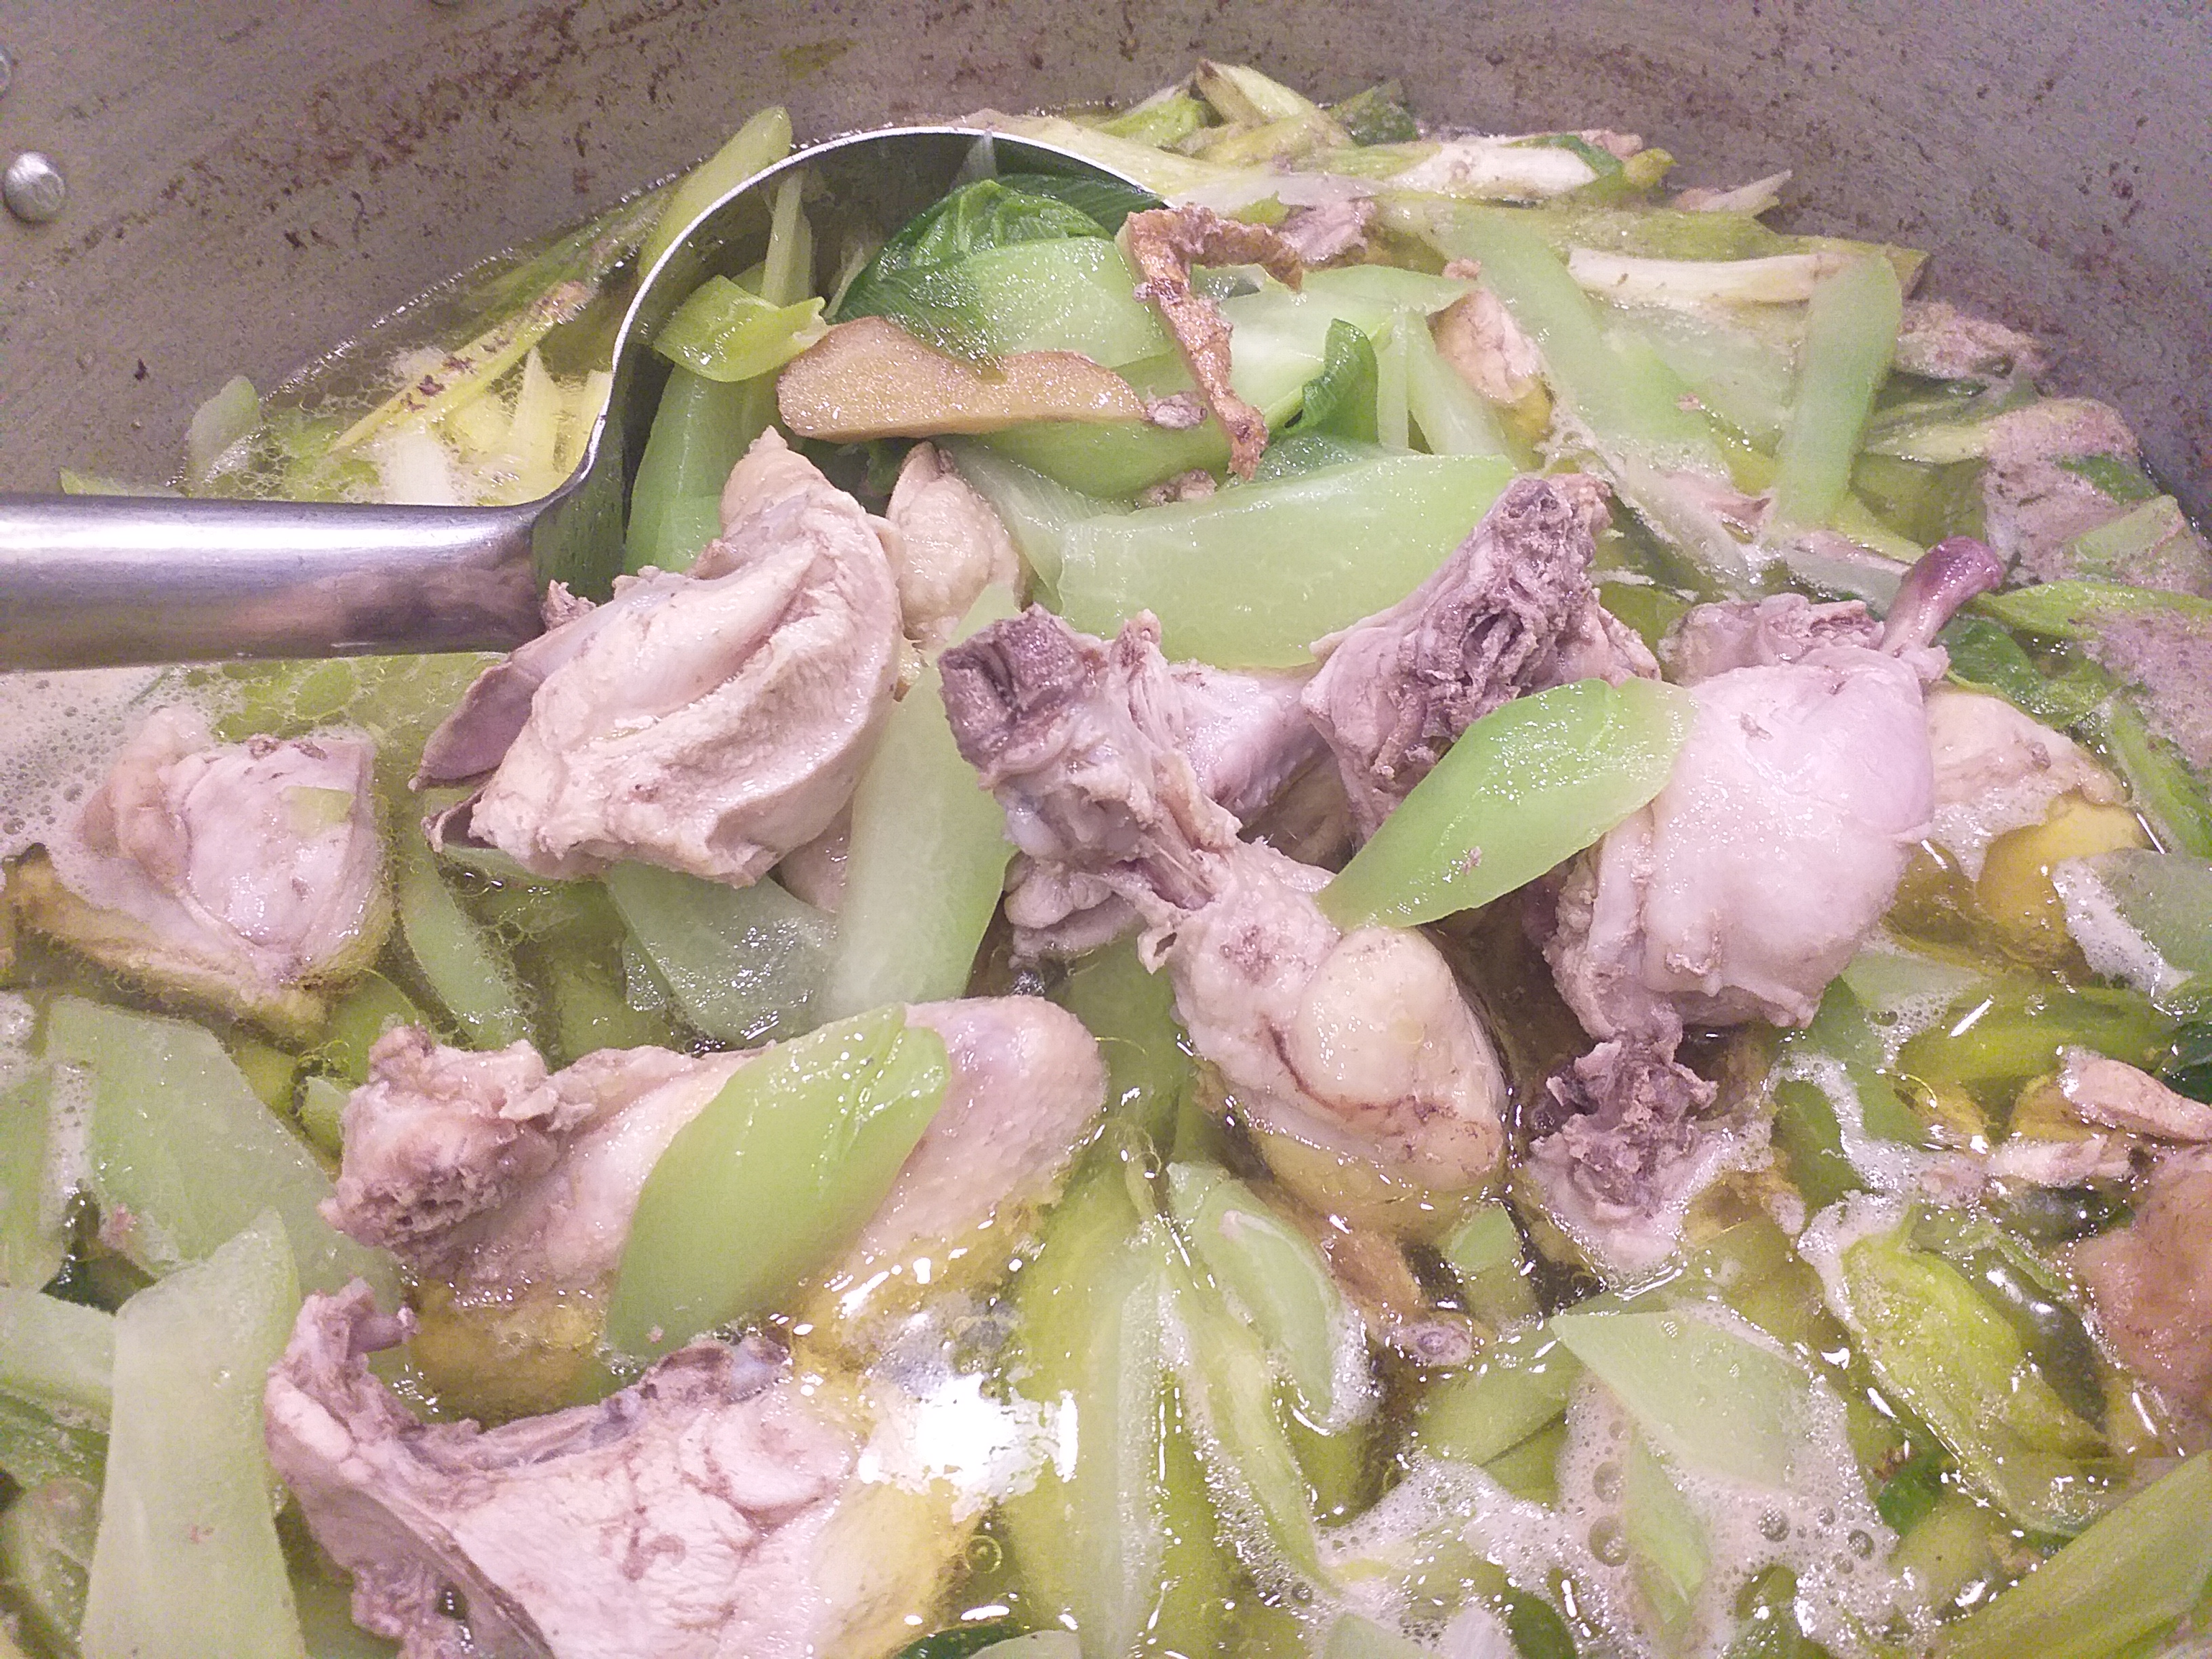 Cooking Chicken Tinola Filipino Chicken Soup For The Lunch Of 80 Persons Hive